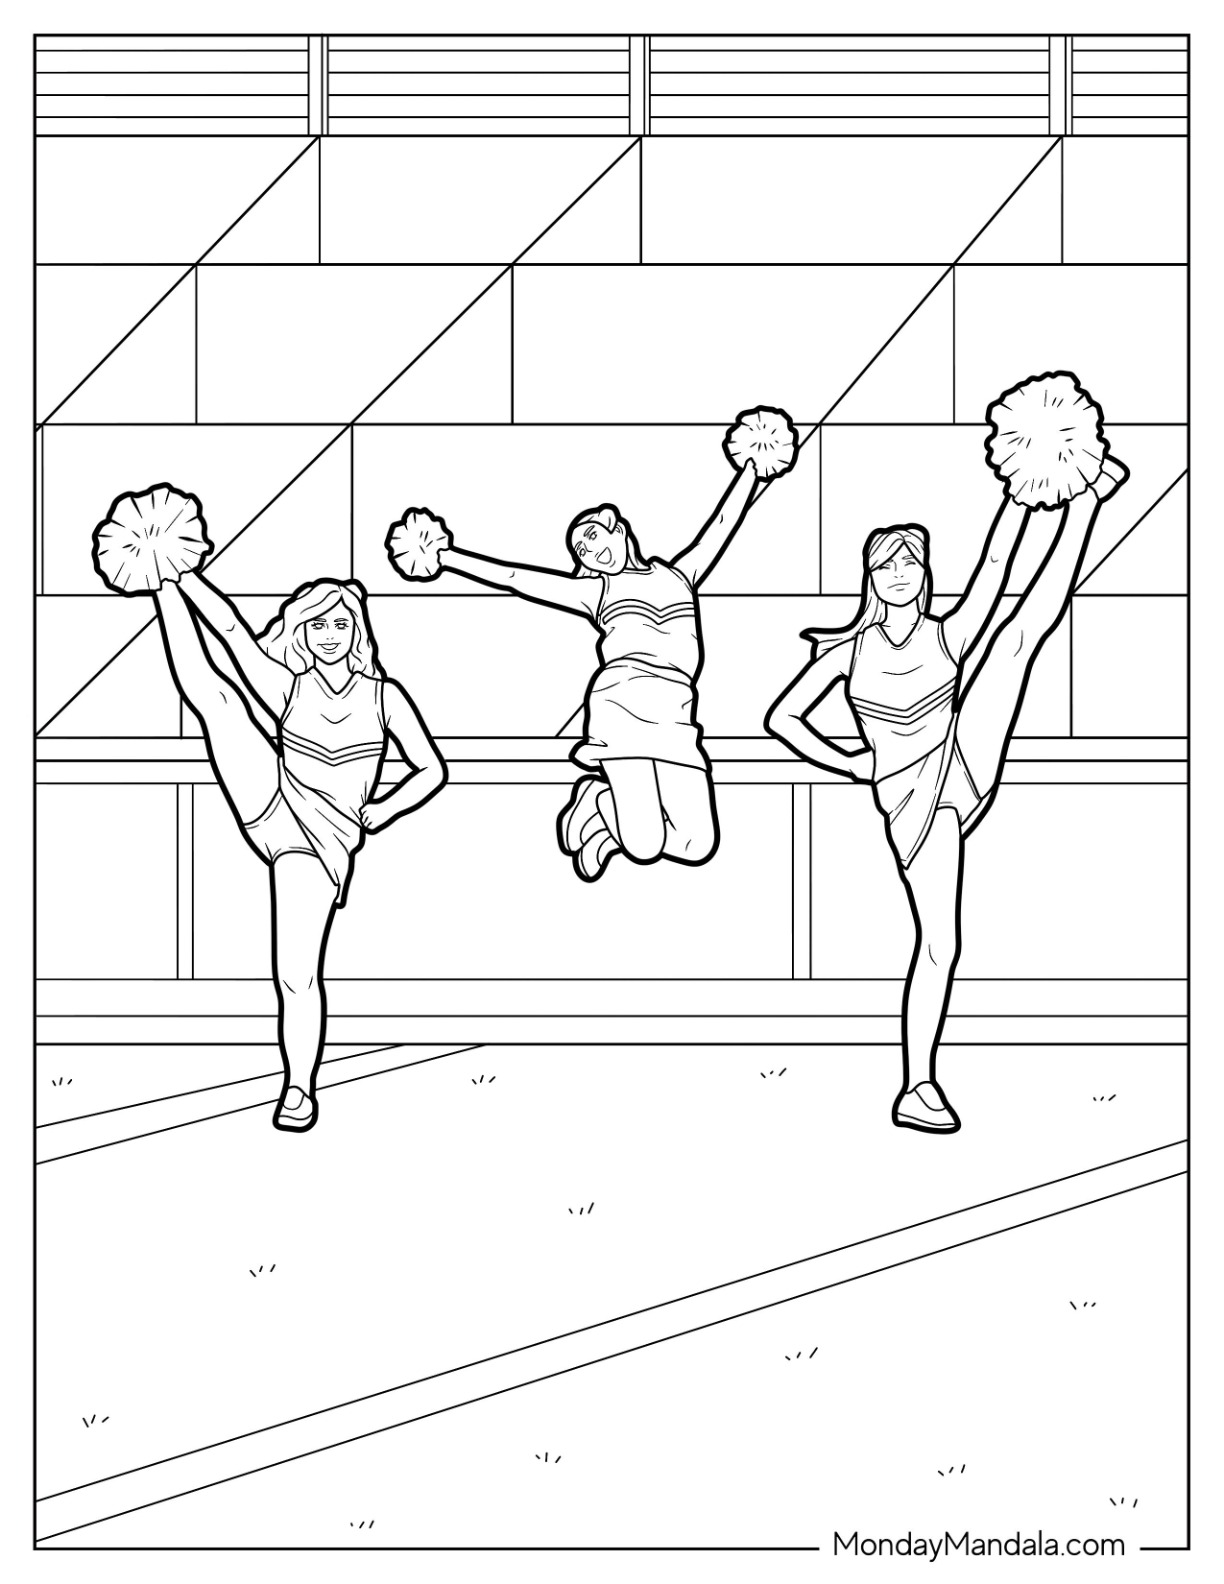 Cheerleading coloring pages free pdf printables